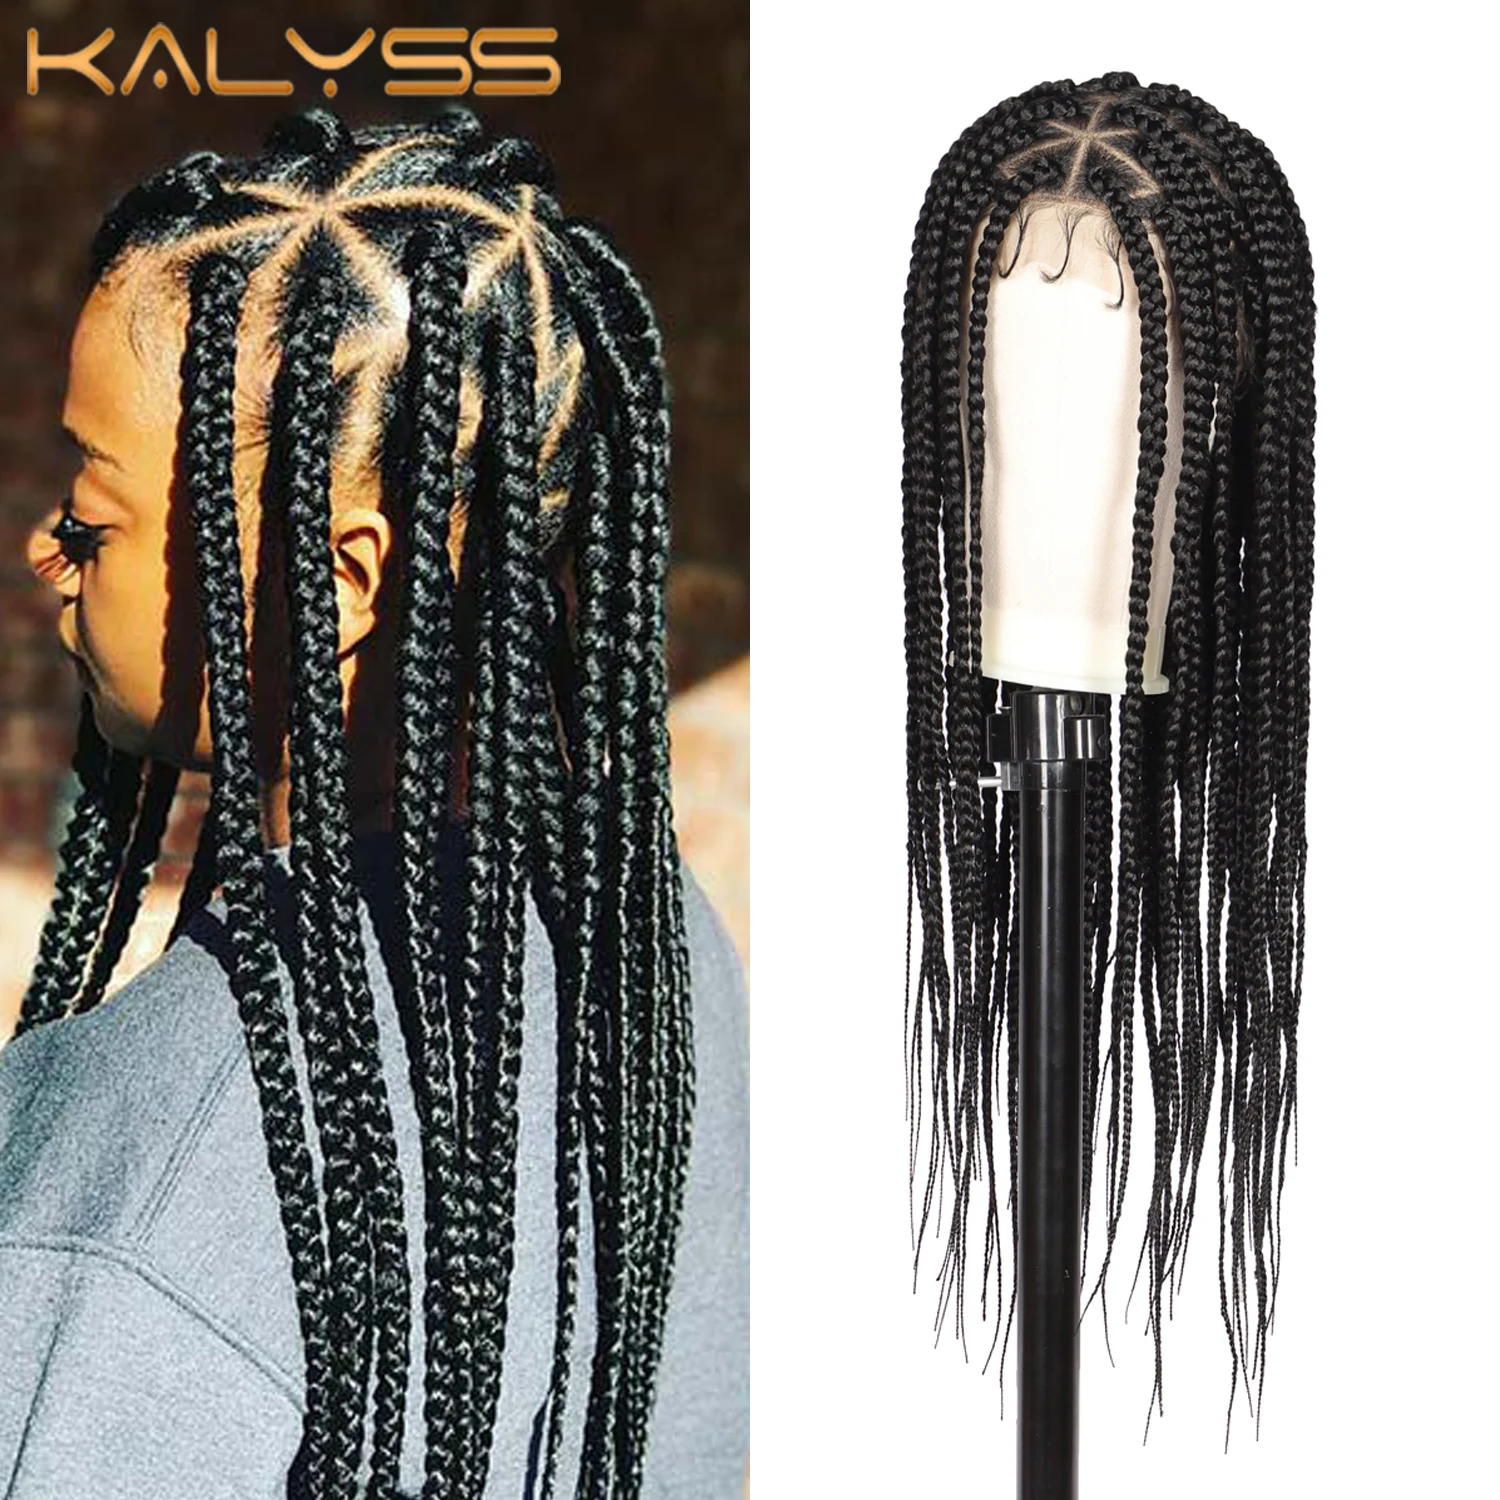 

Kalyss 32" Full Lace Front Braided Wigs With Baby Hair 360 Lace Large Triangle Knotless Box Braid Synthetic Wig For Black Women